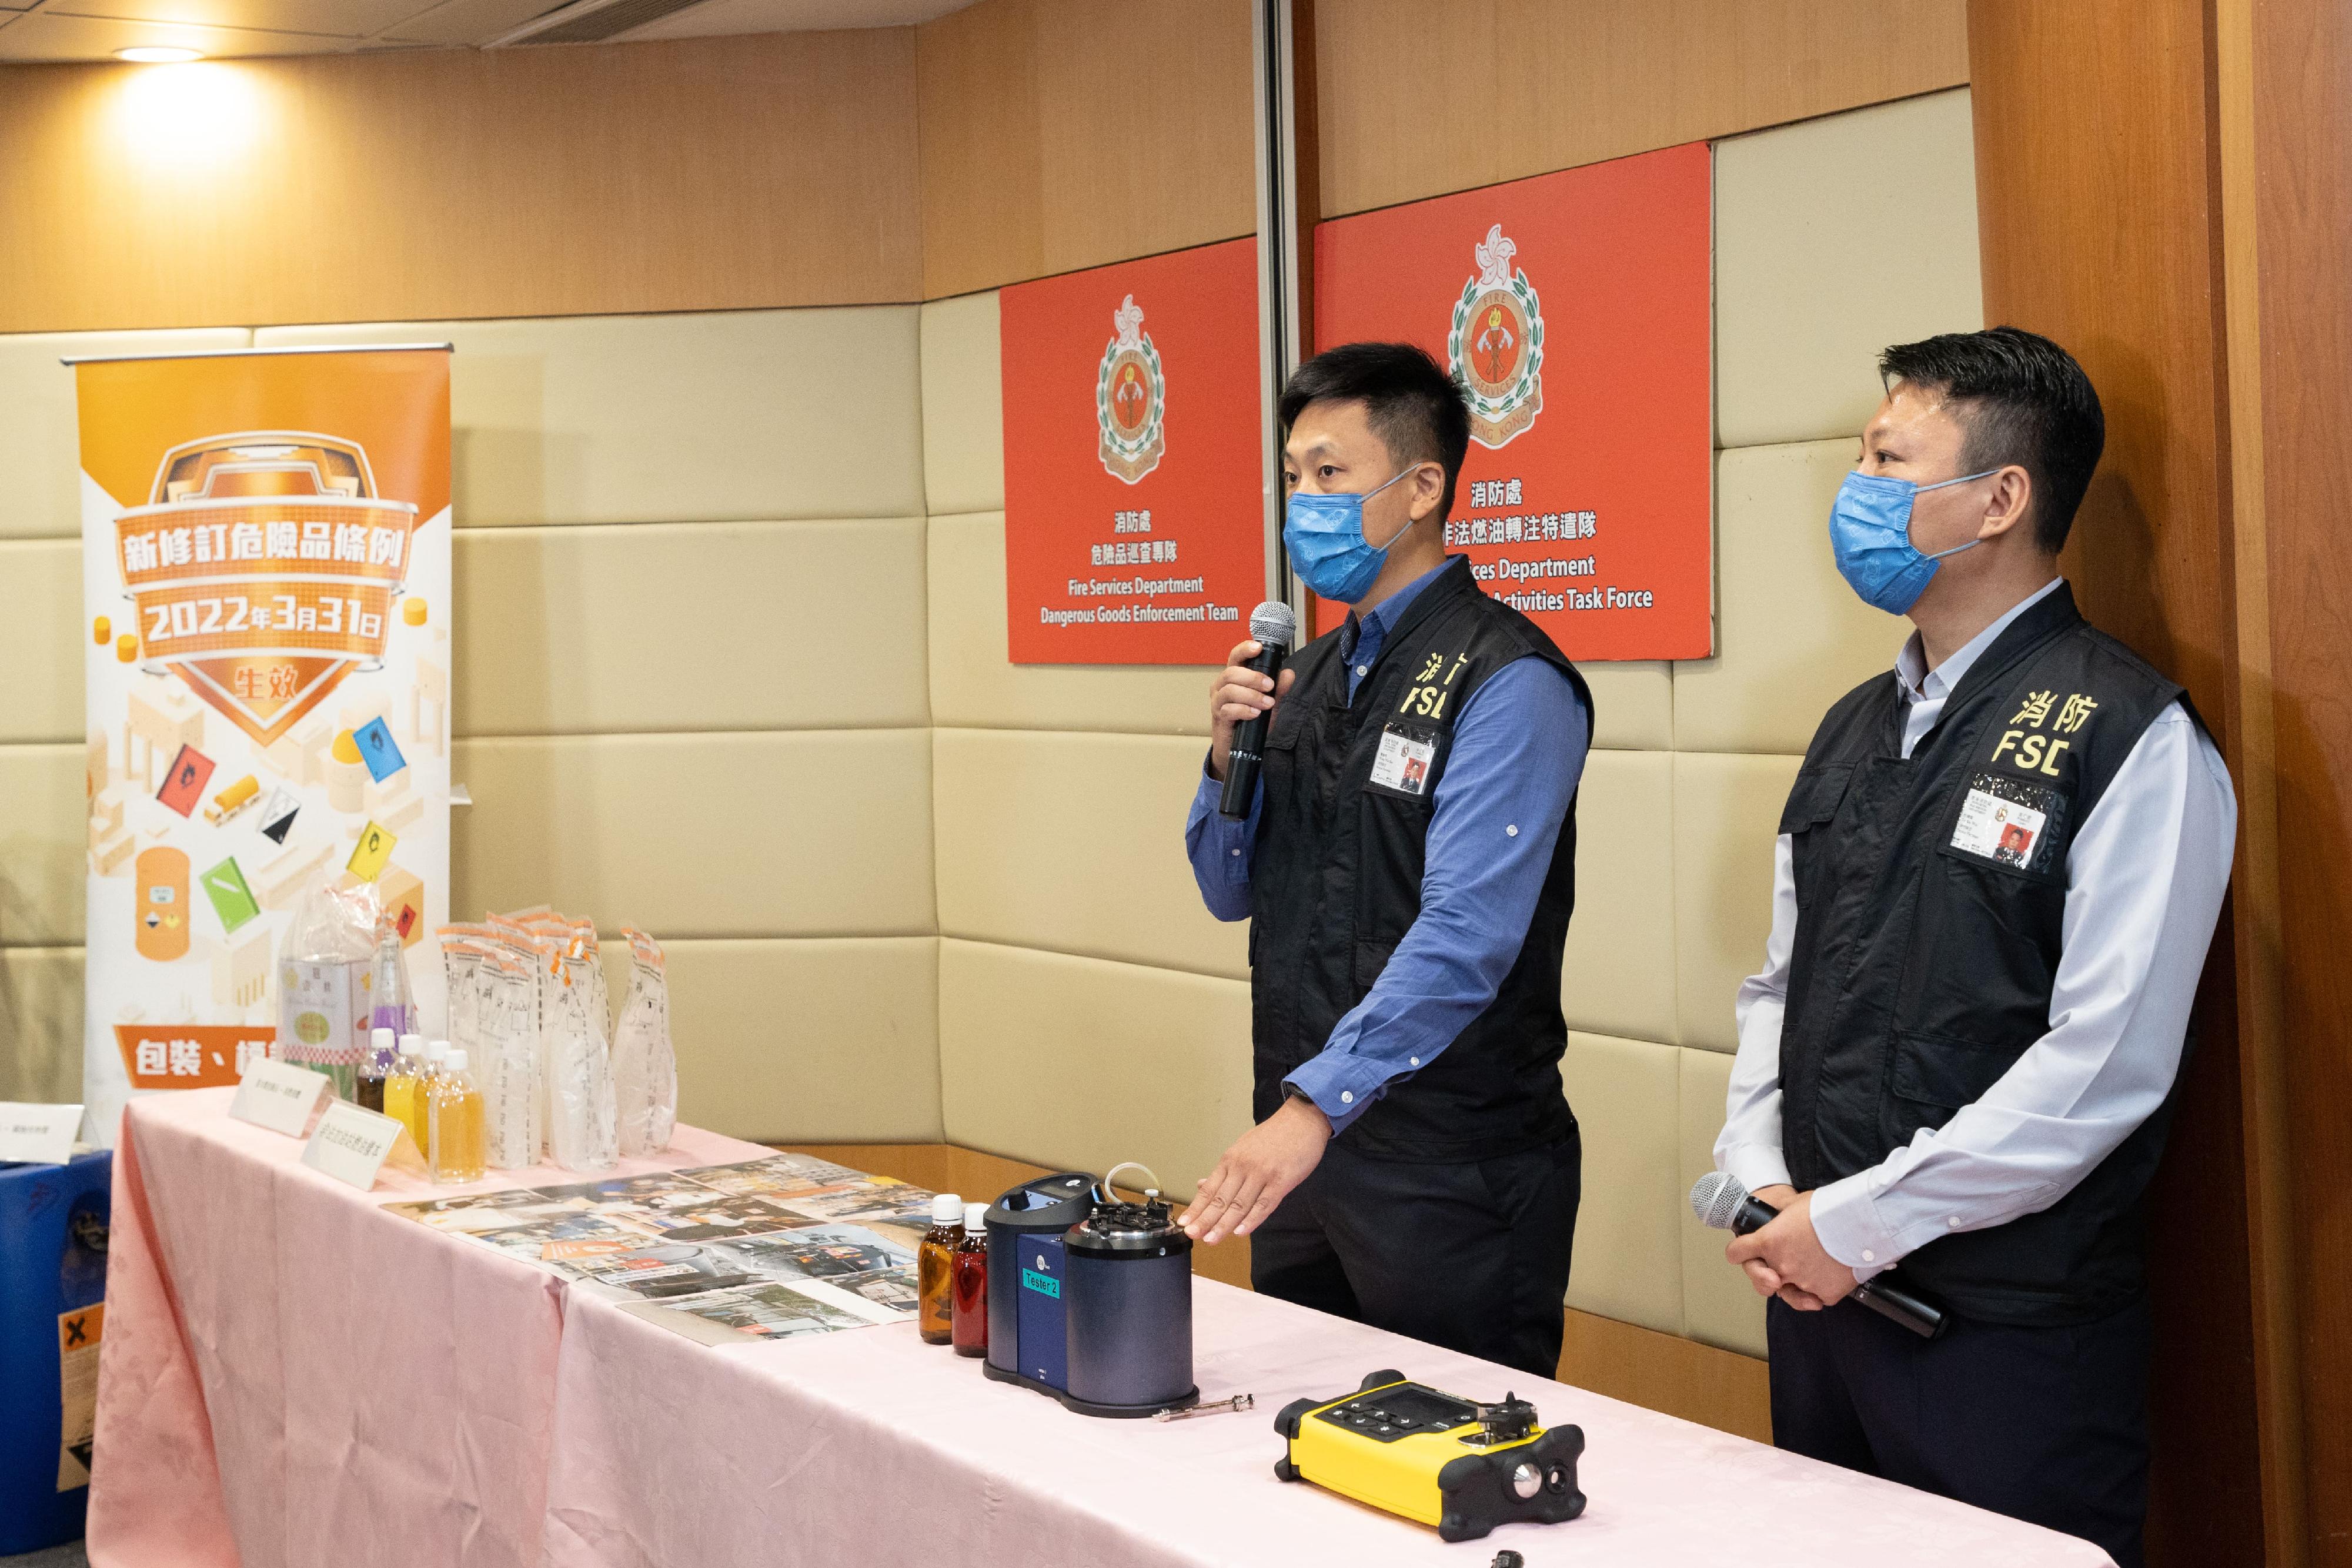 The Licensing and Certification Command of the Fire Services Department (FSD) held a press conference today (June 17) on a territory-wide enforcement operation codenamed "Crescent" in June. Photo shows FSD personnel introducing equipment used in the operation to assist in evidence collection. 